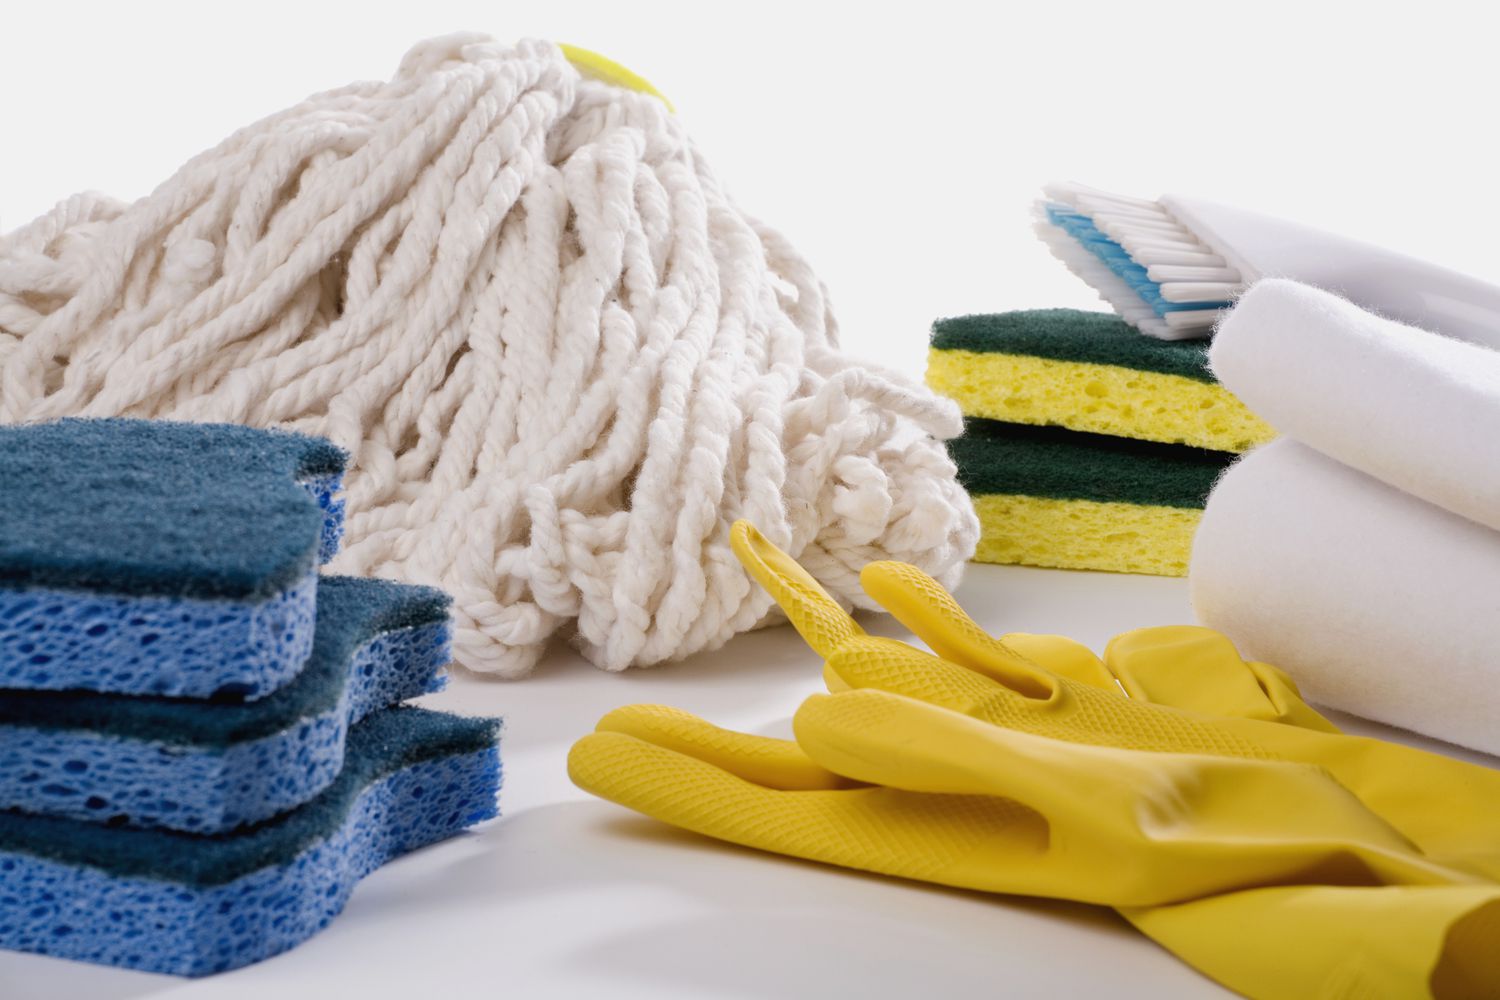 Mop and cleaning supplies